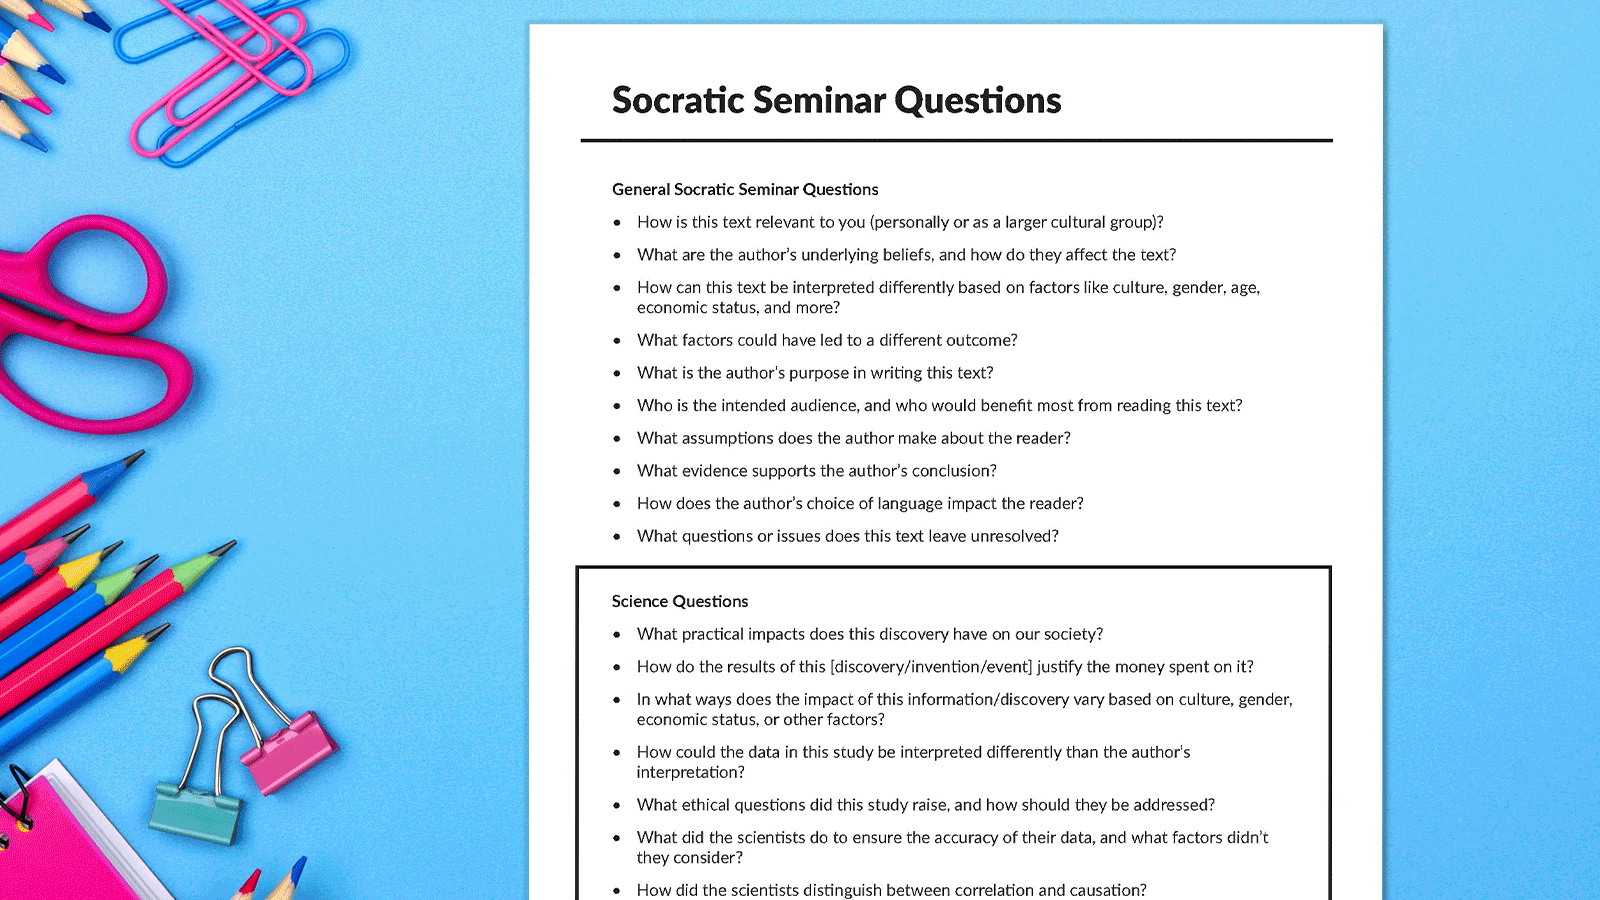 GIF featuring printable list of Socratic seminar questions.